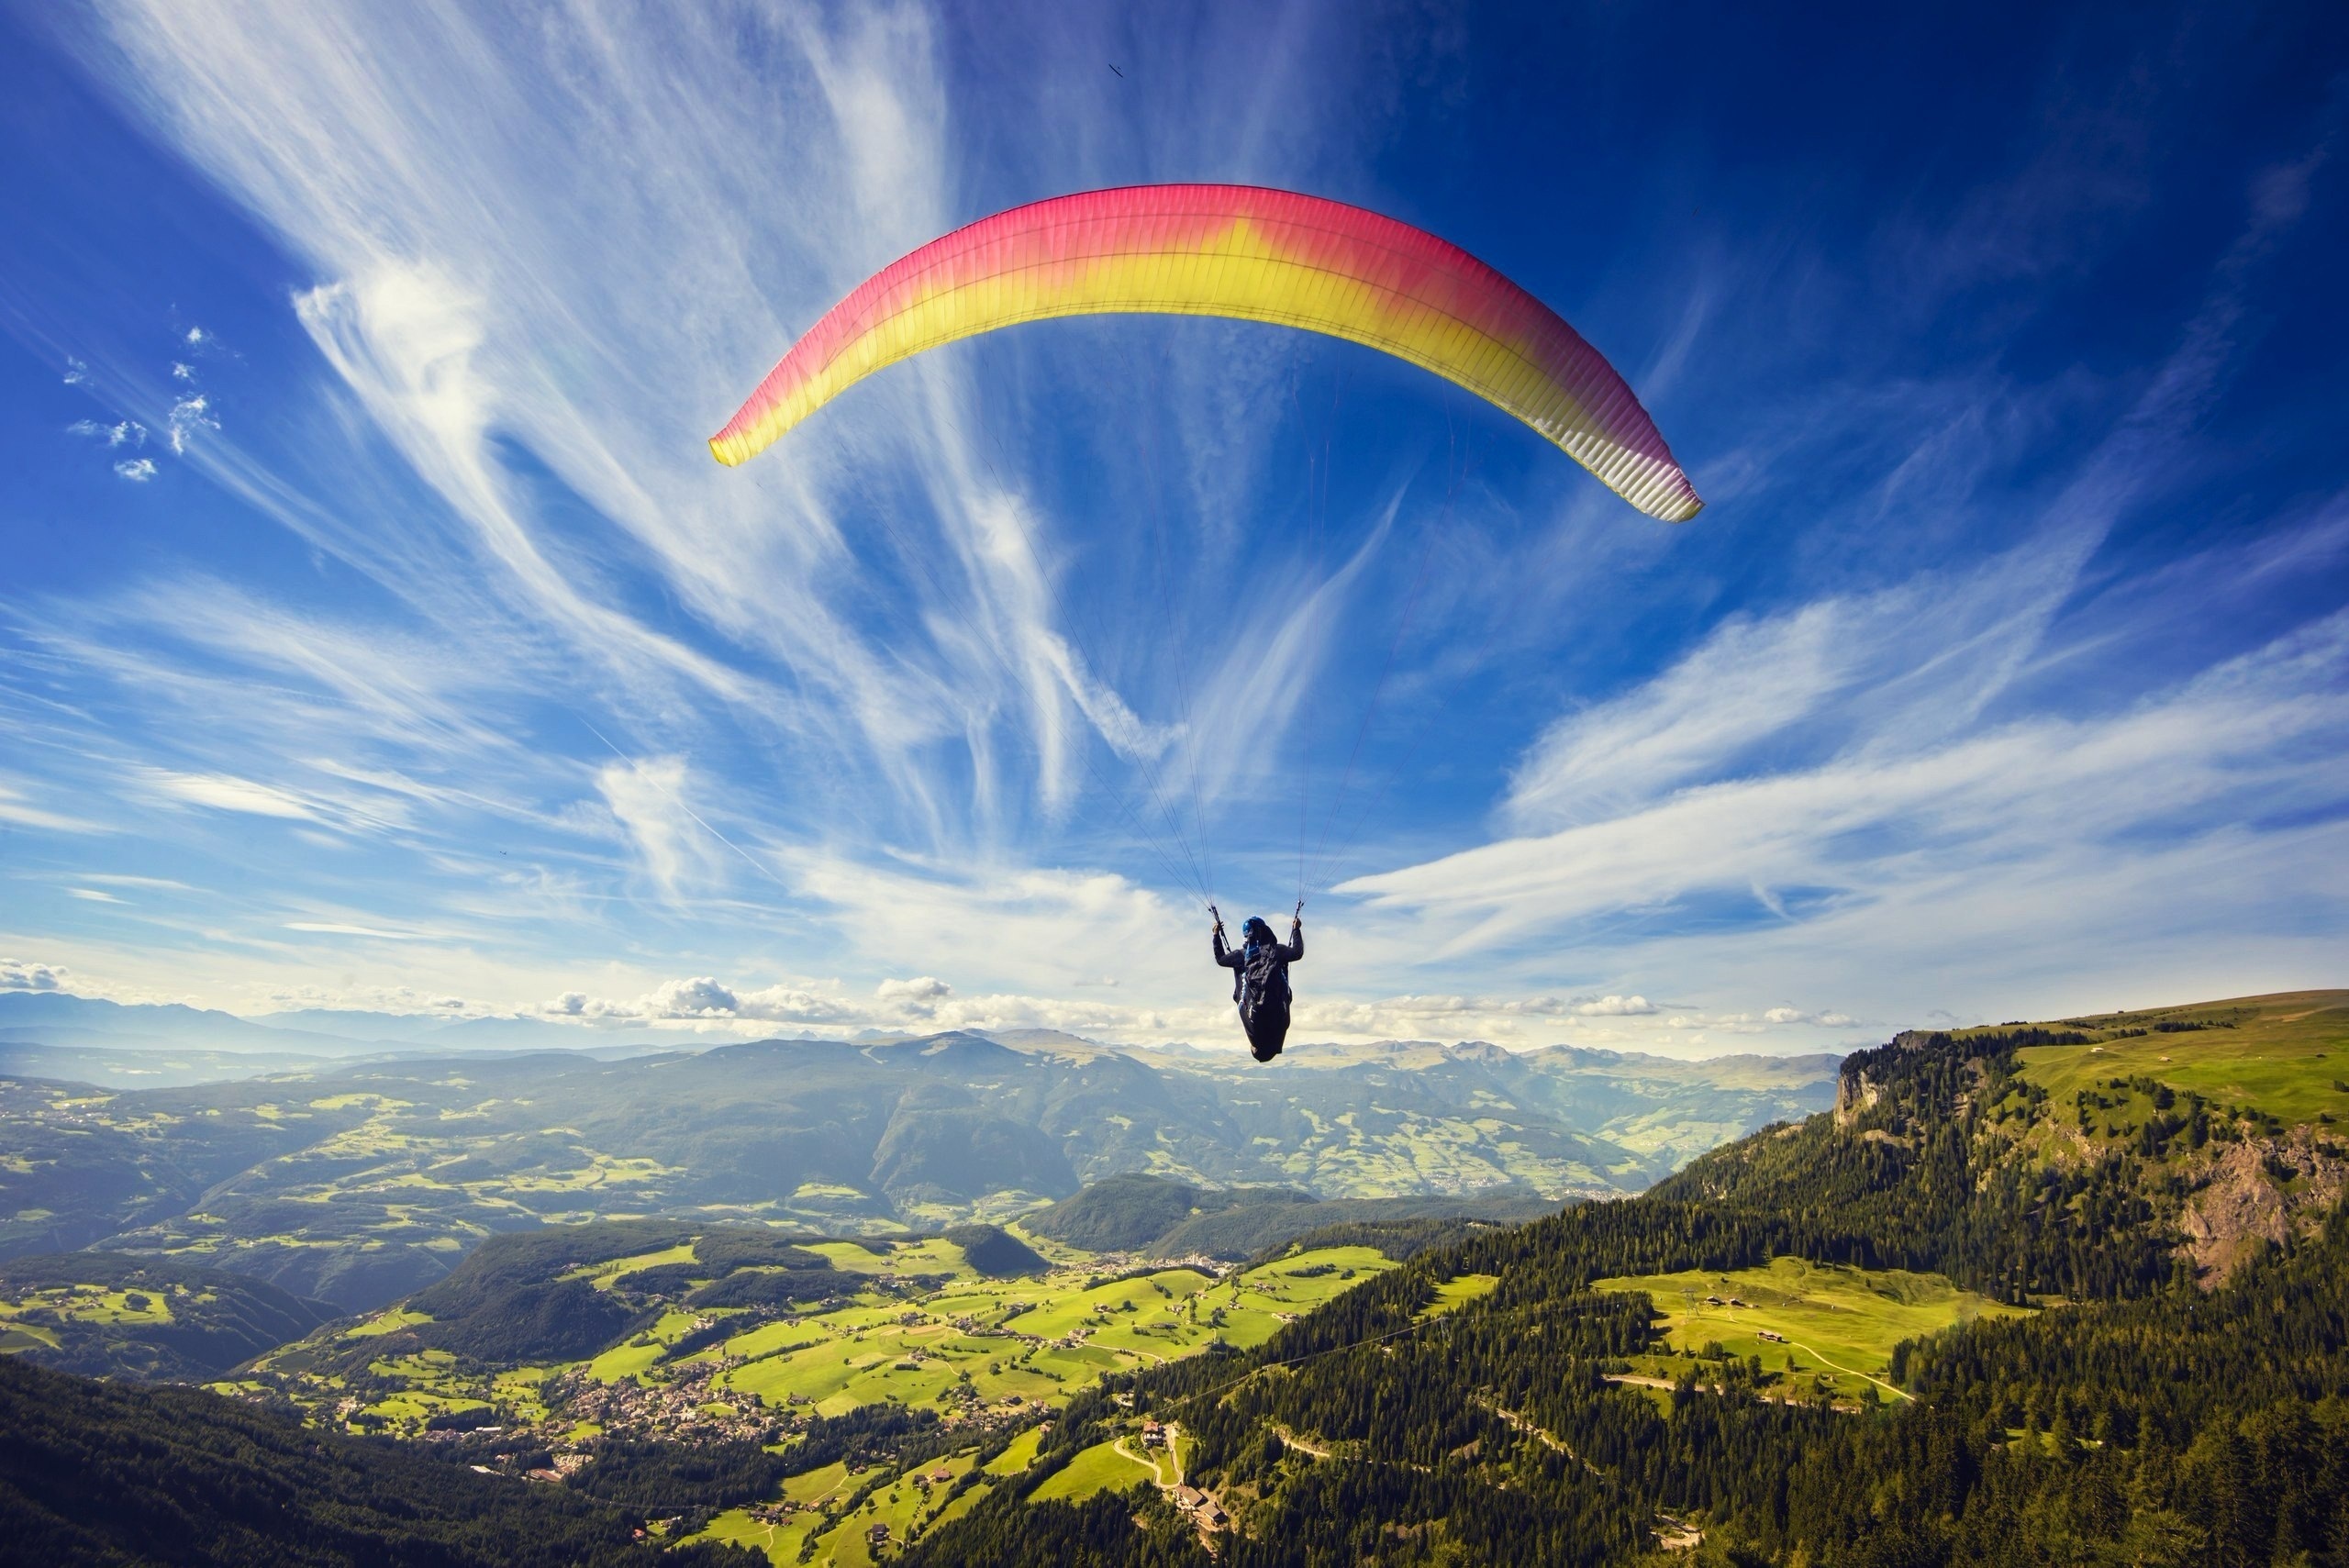 Paragliding: Parachute as a wing, Flying paraglider in the mountains. 2560x1710 HD Wallpaper.